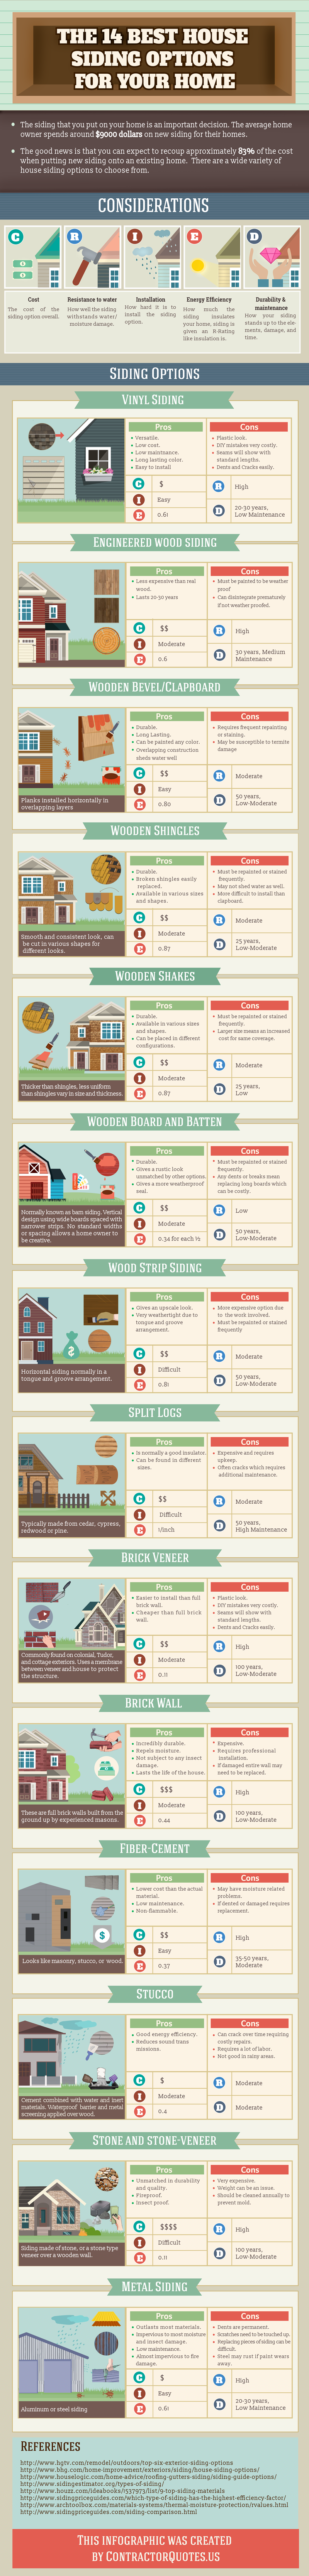 infographic describing the pros and cons of different home siding options